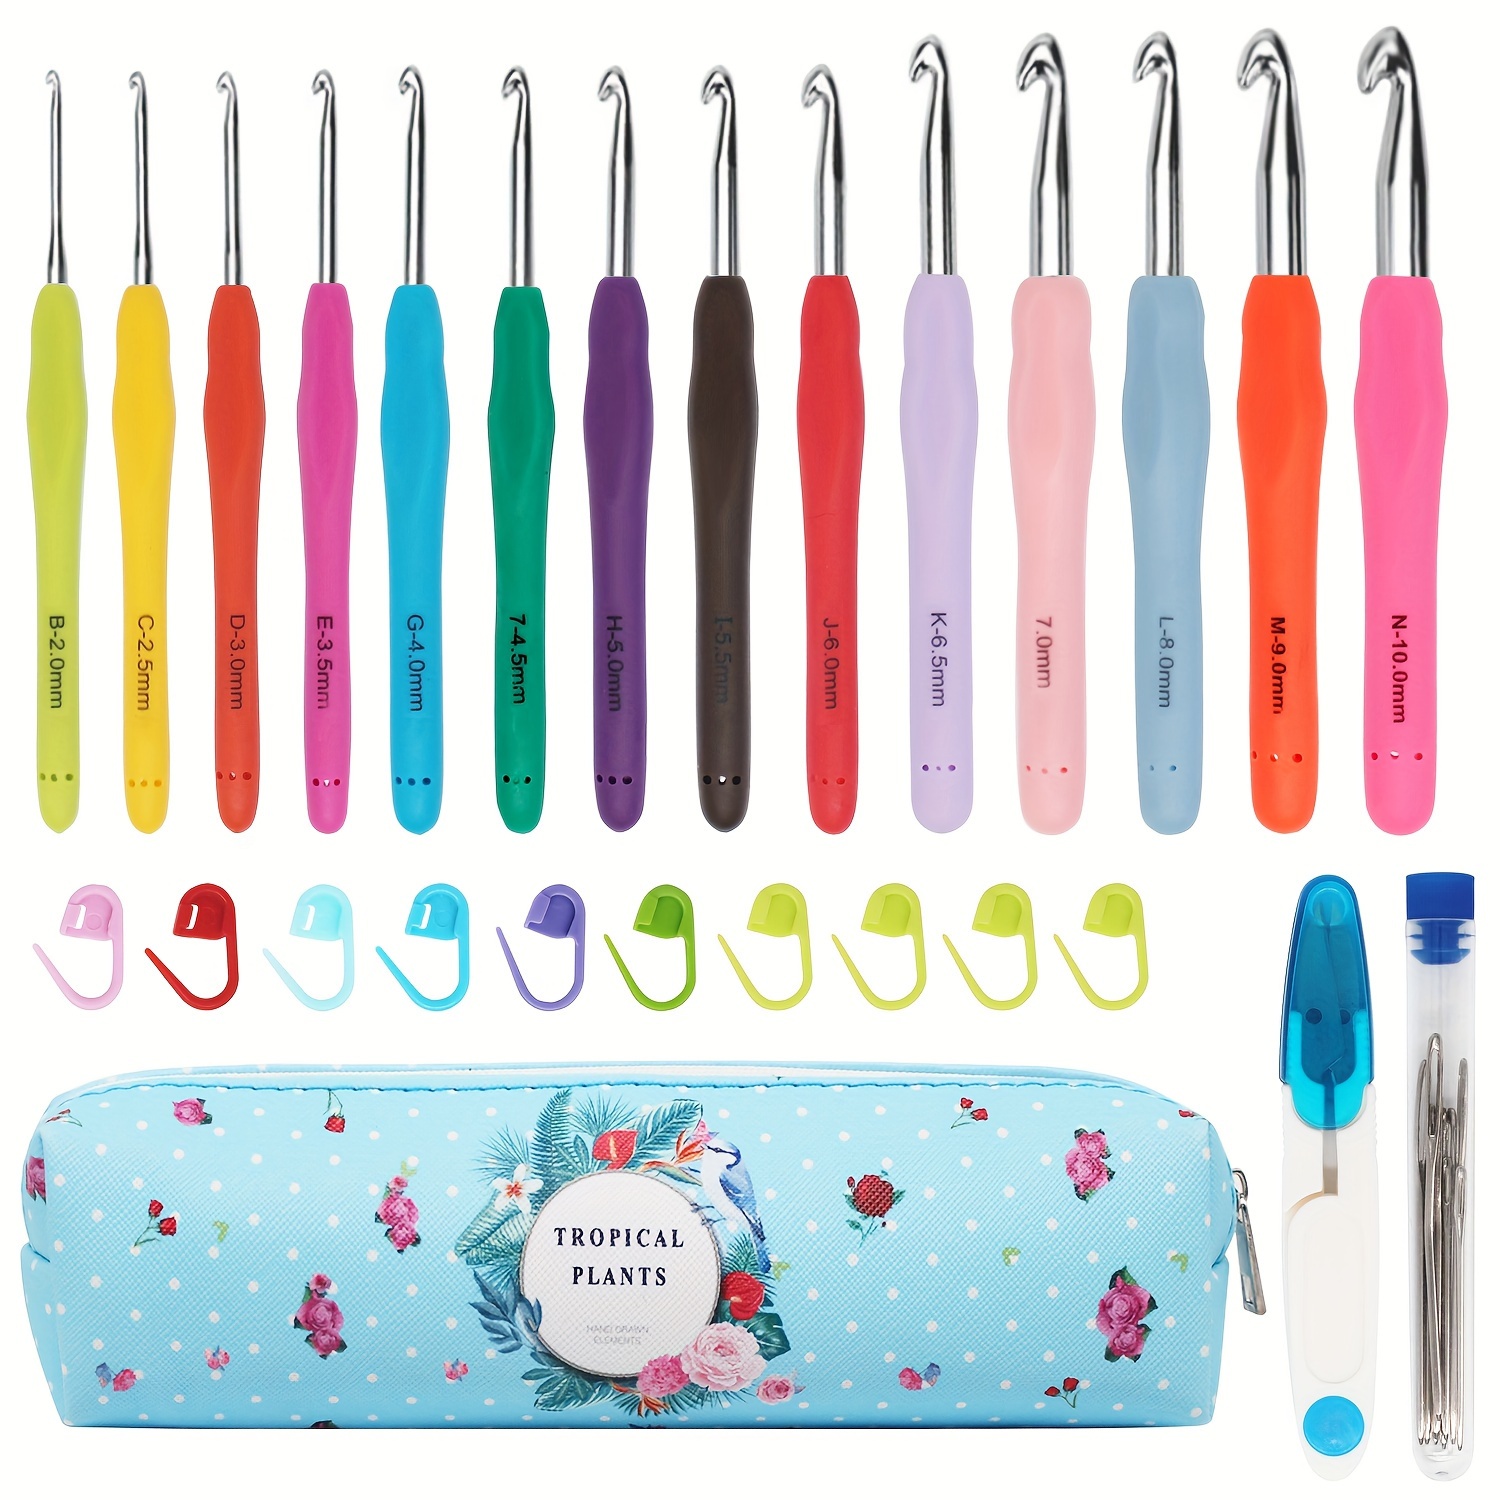 10 Small Sizes Crochet Hooks Set, 0.5mm - 2.75mm Ergonomic Soft Handle  Crochets with Portable Case - Perfect for Lacework